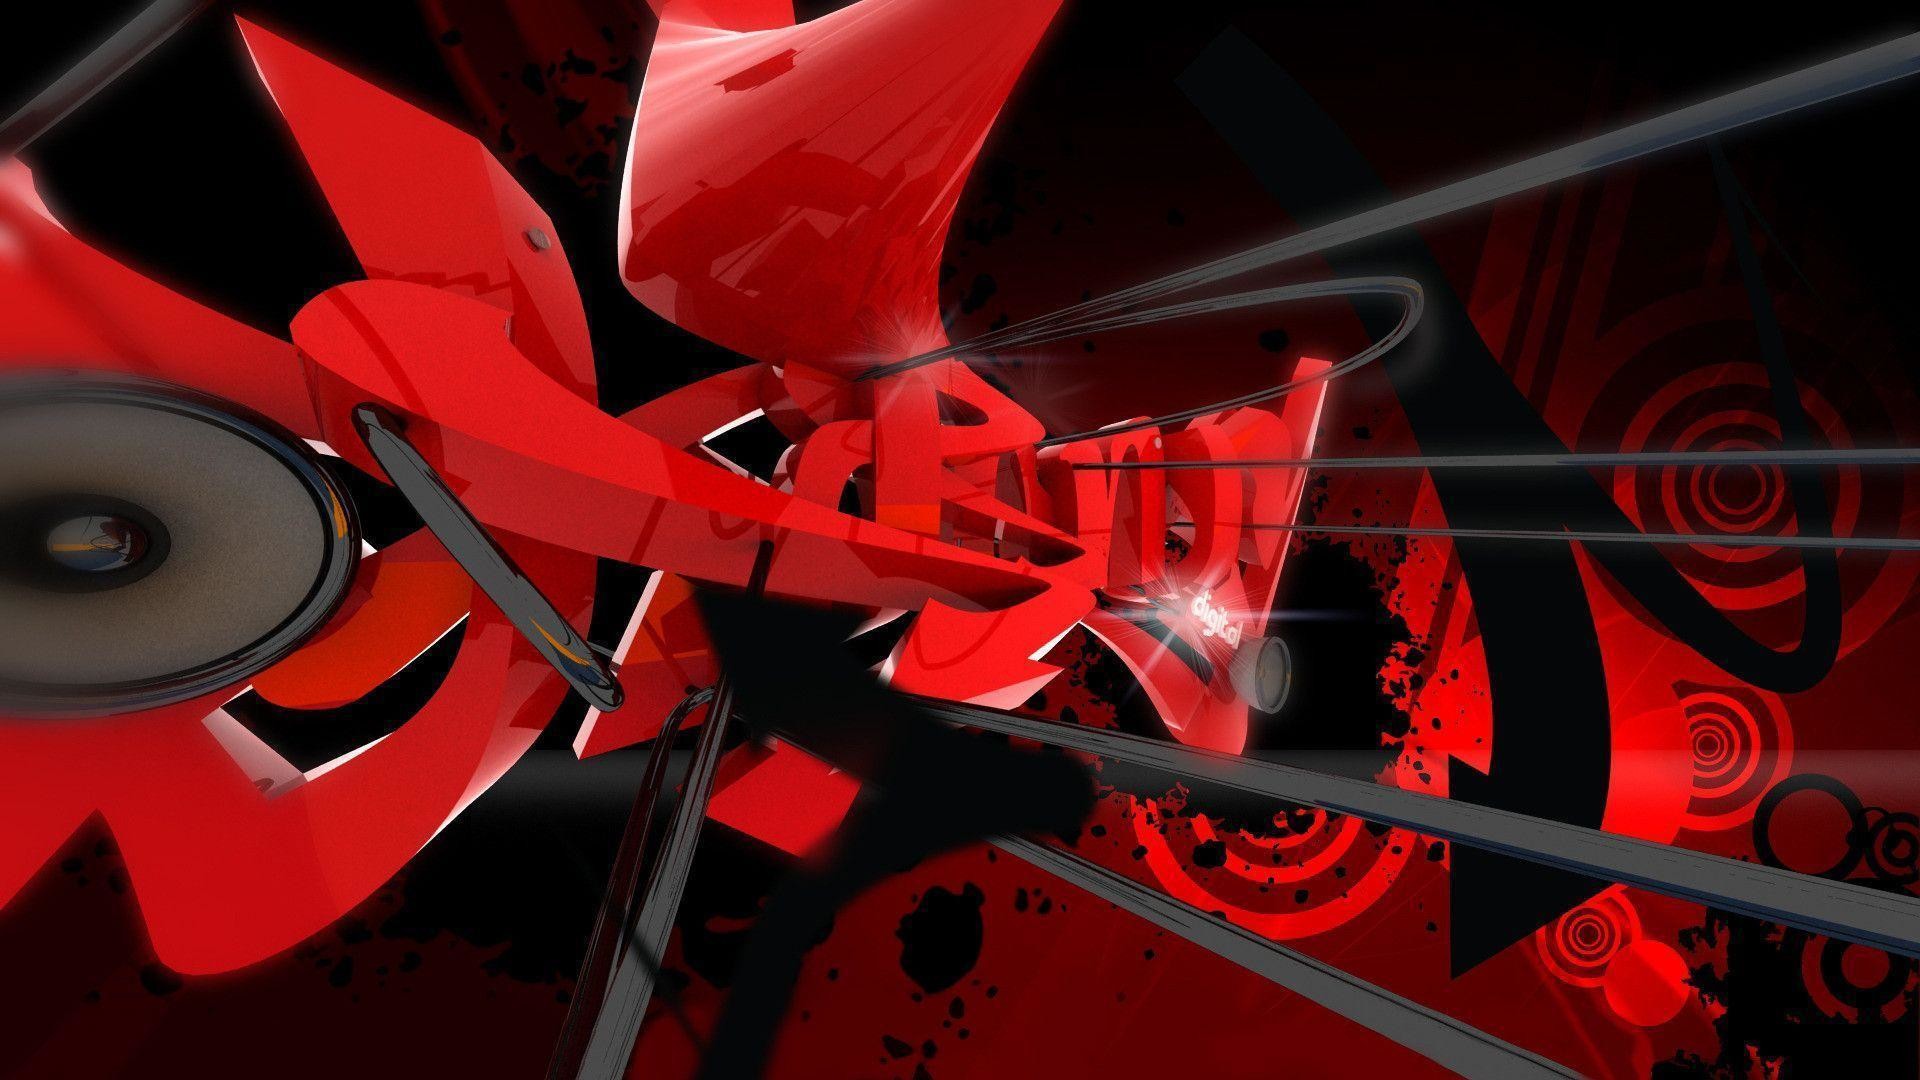 1920x1080, Black And Red Graffiti Wallpaper - Black And Red Hip Hop - HD Wallpaper 